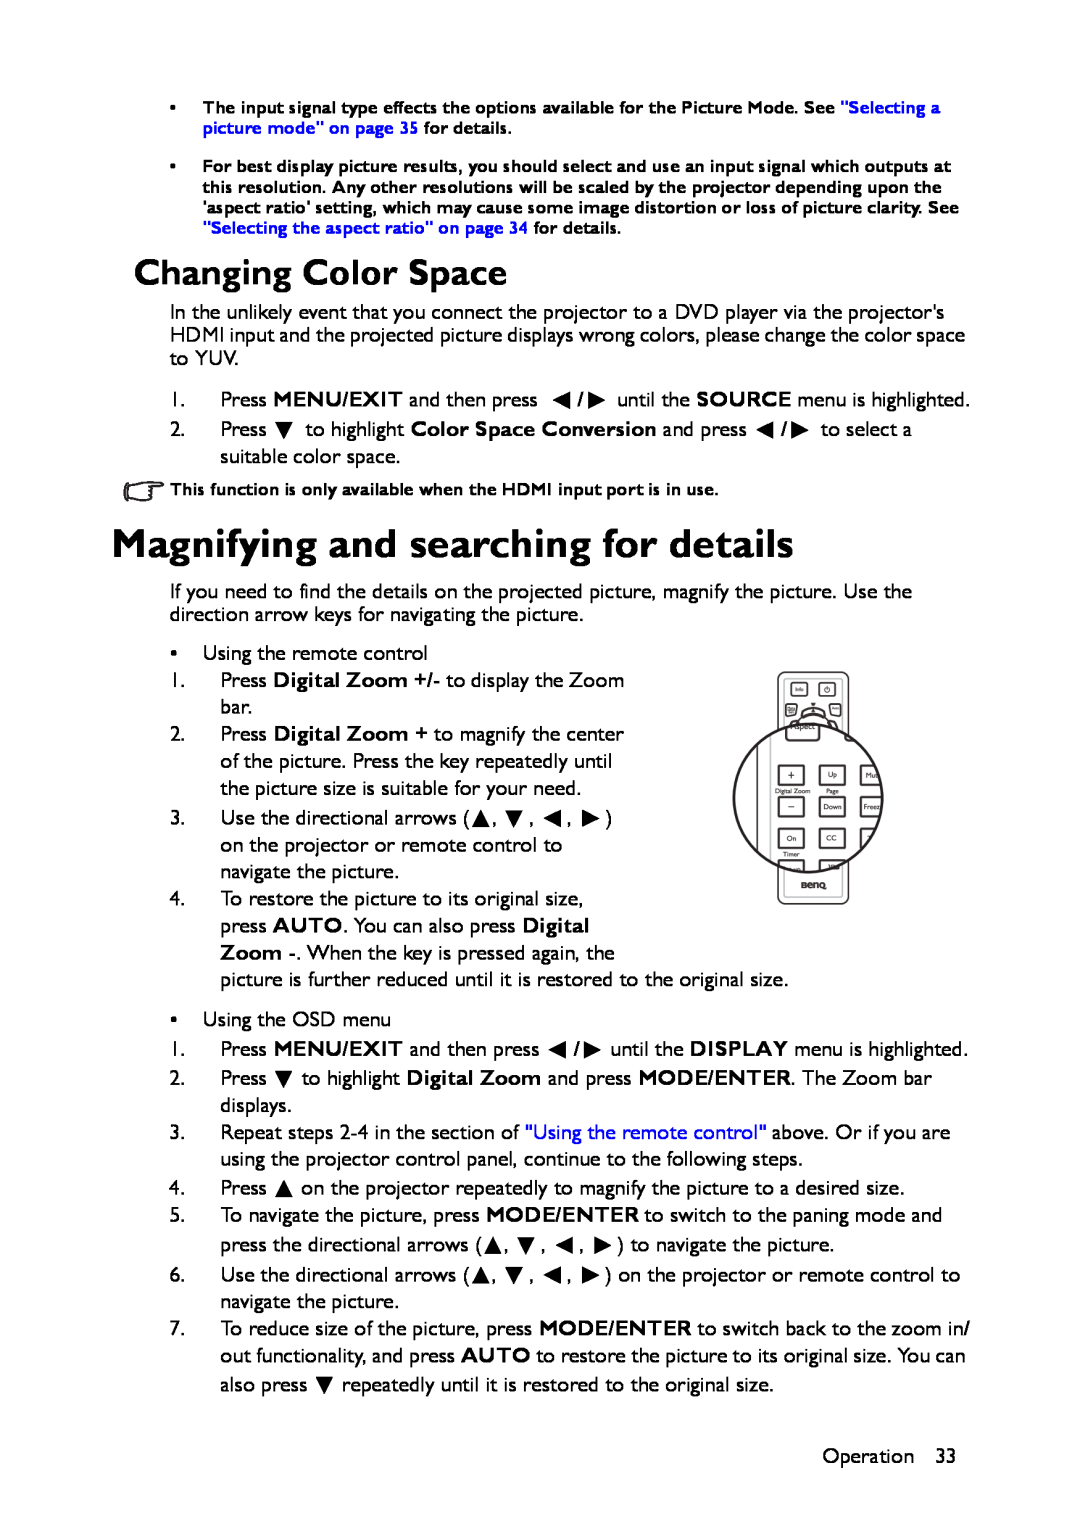 BenQ MX661 user manual Magnifying and searching for details, Changing Color Space 